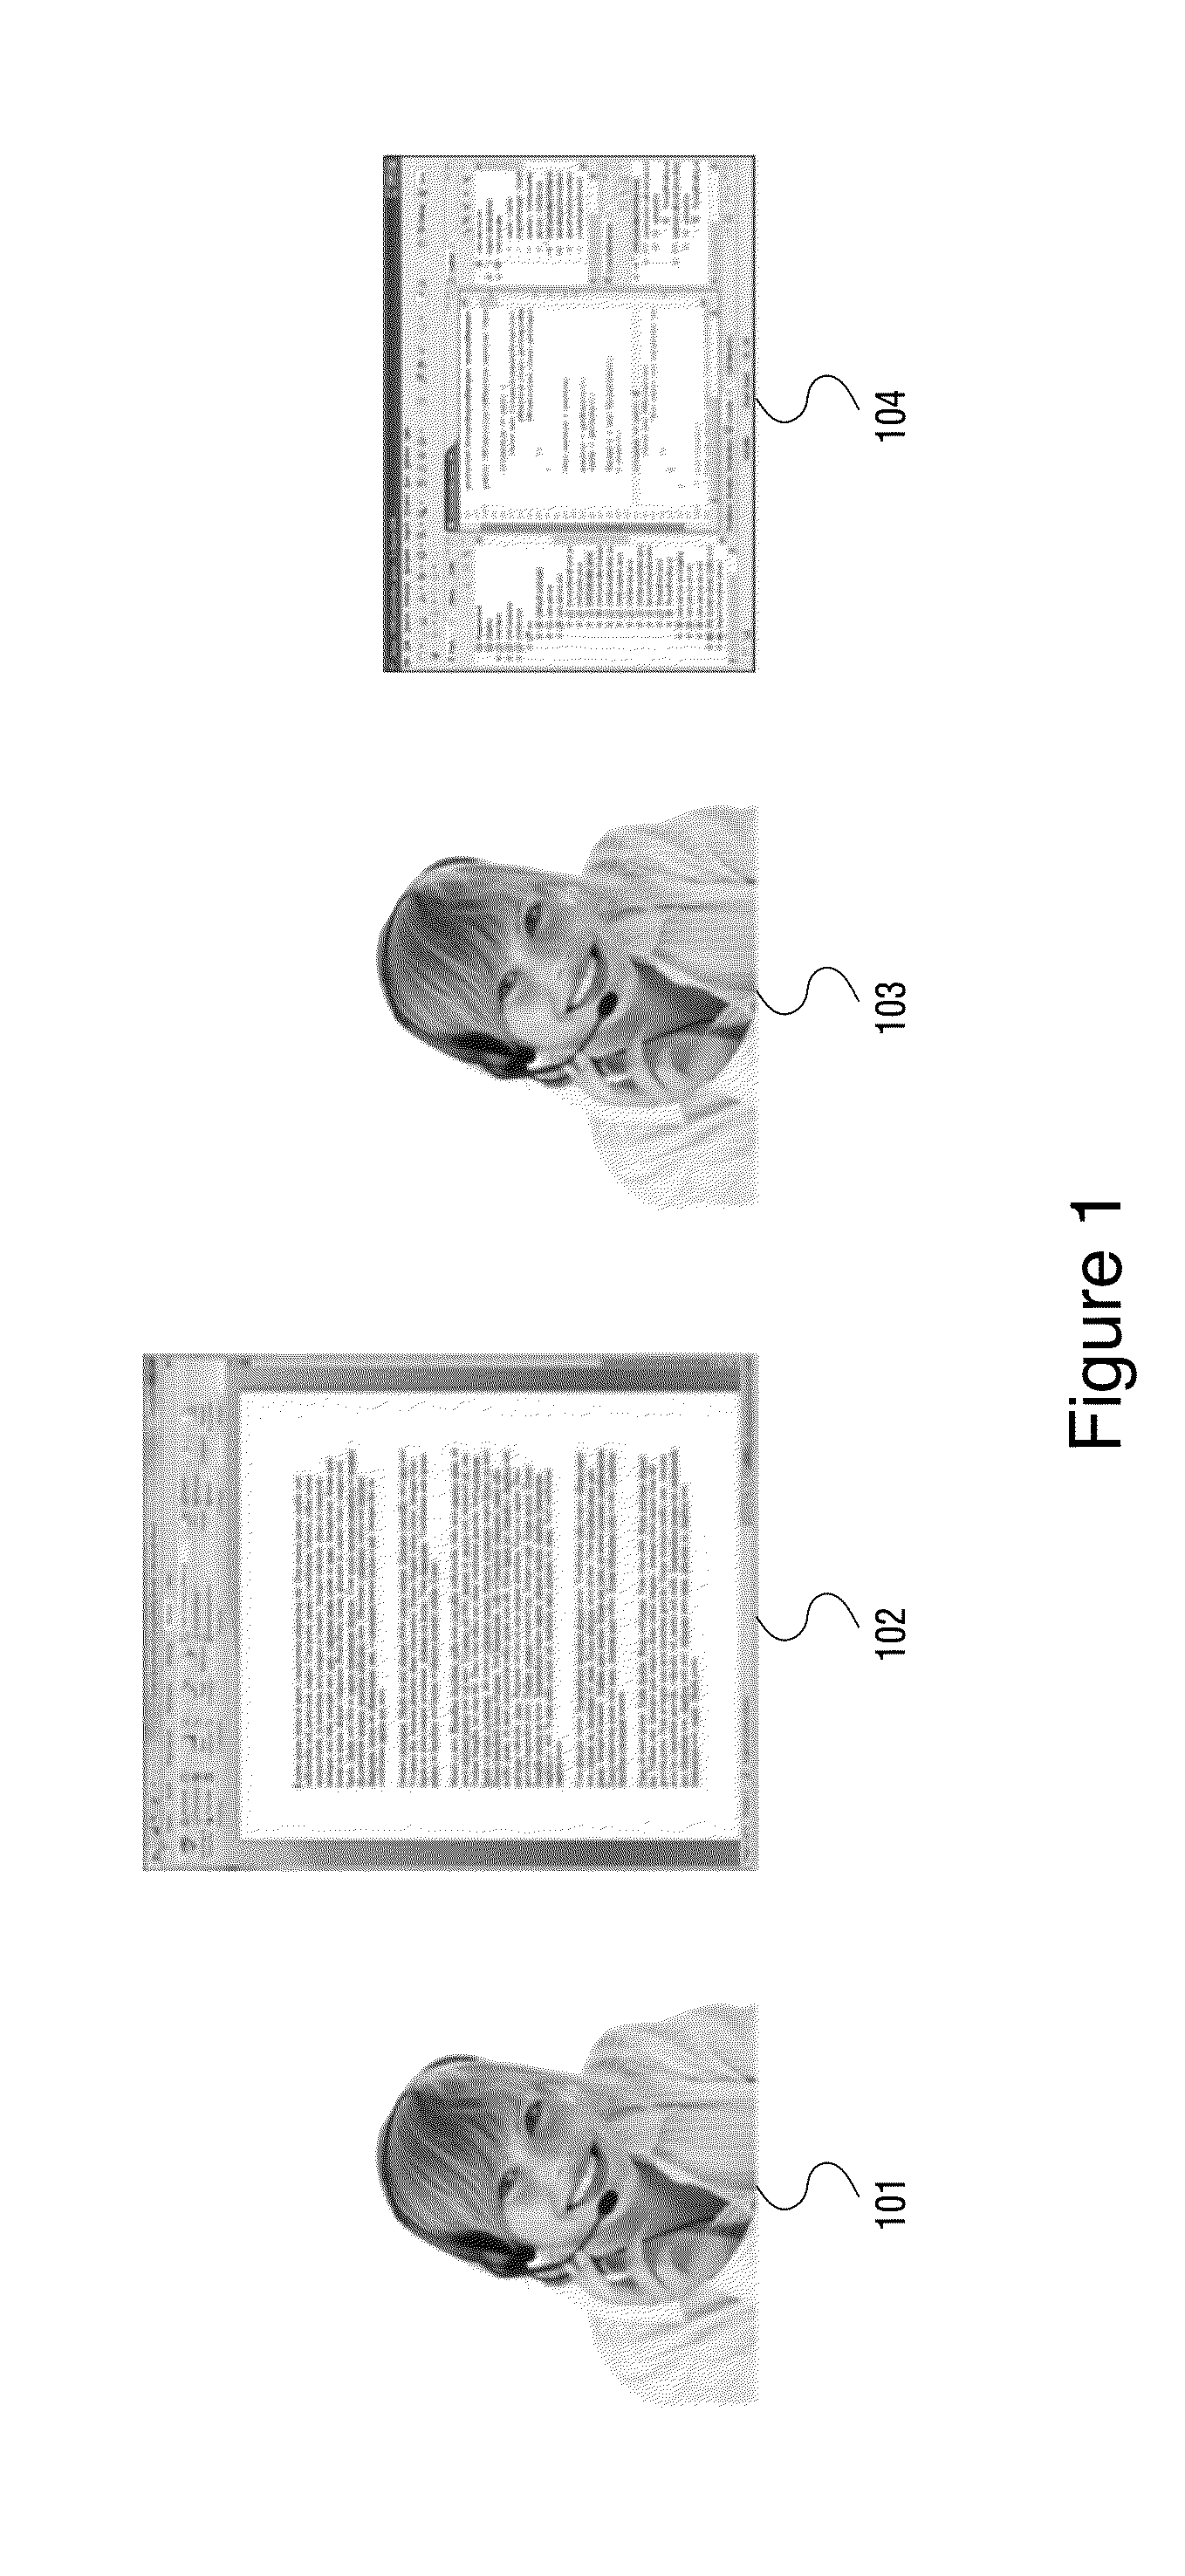 Systems and methods for real-time efficient navigation of video streams